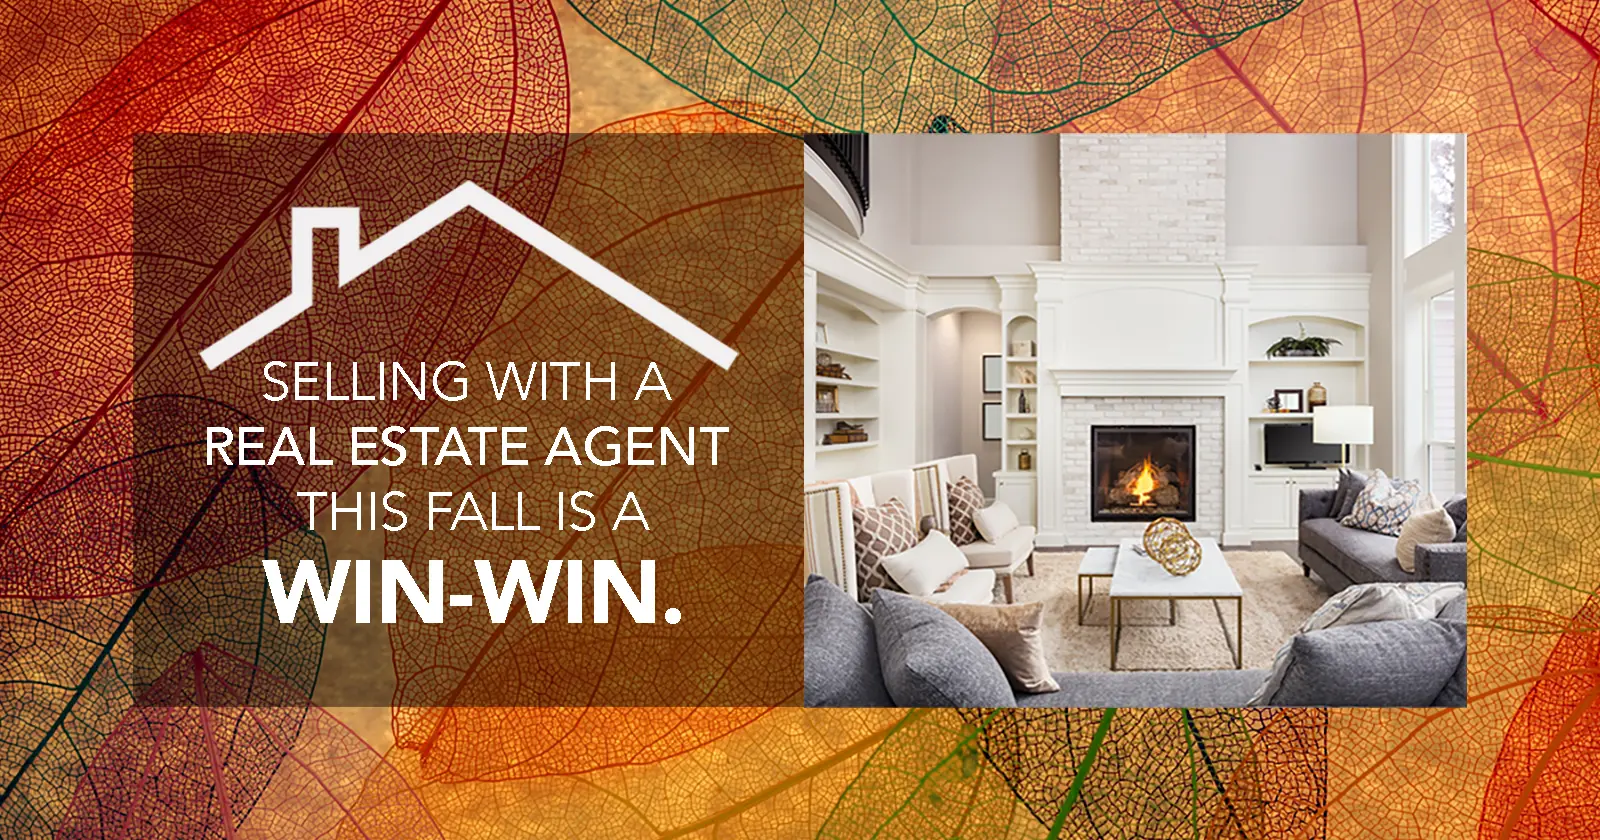 Selling with a Real Estate Agent This Fall is a Win-Win